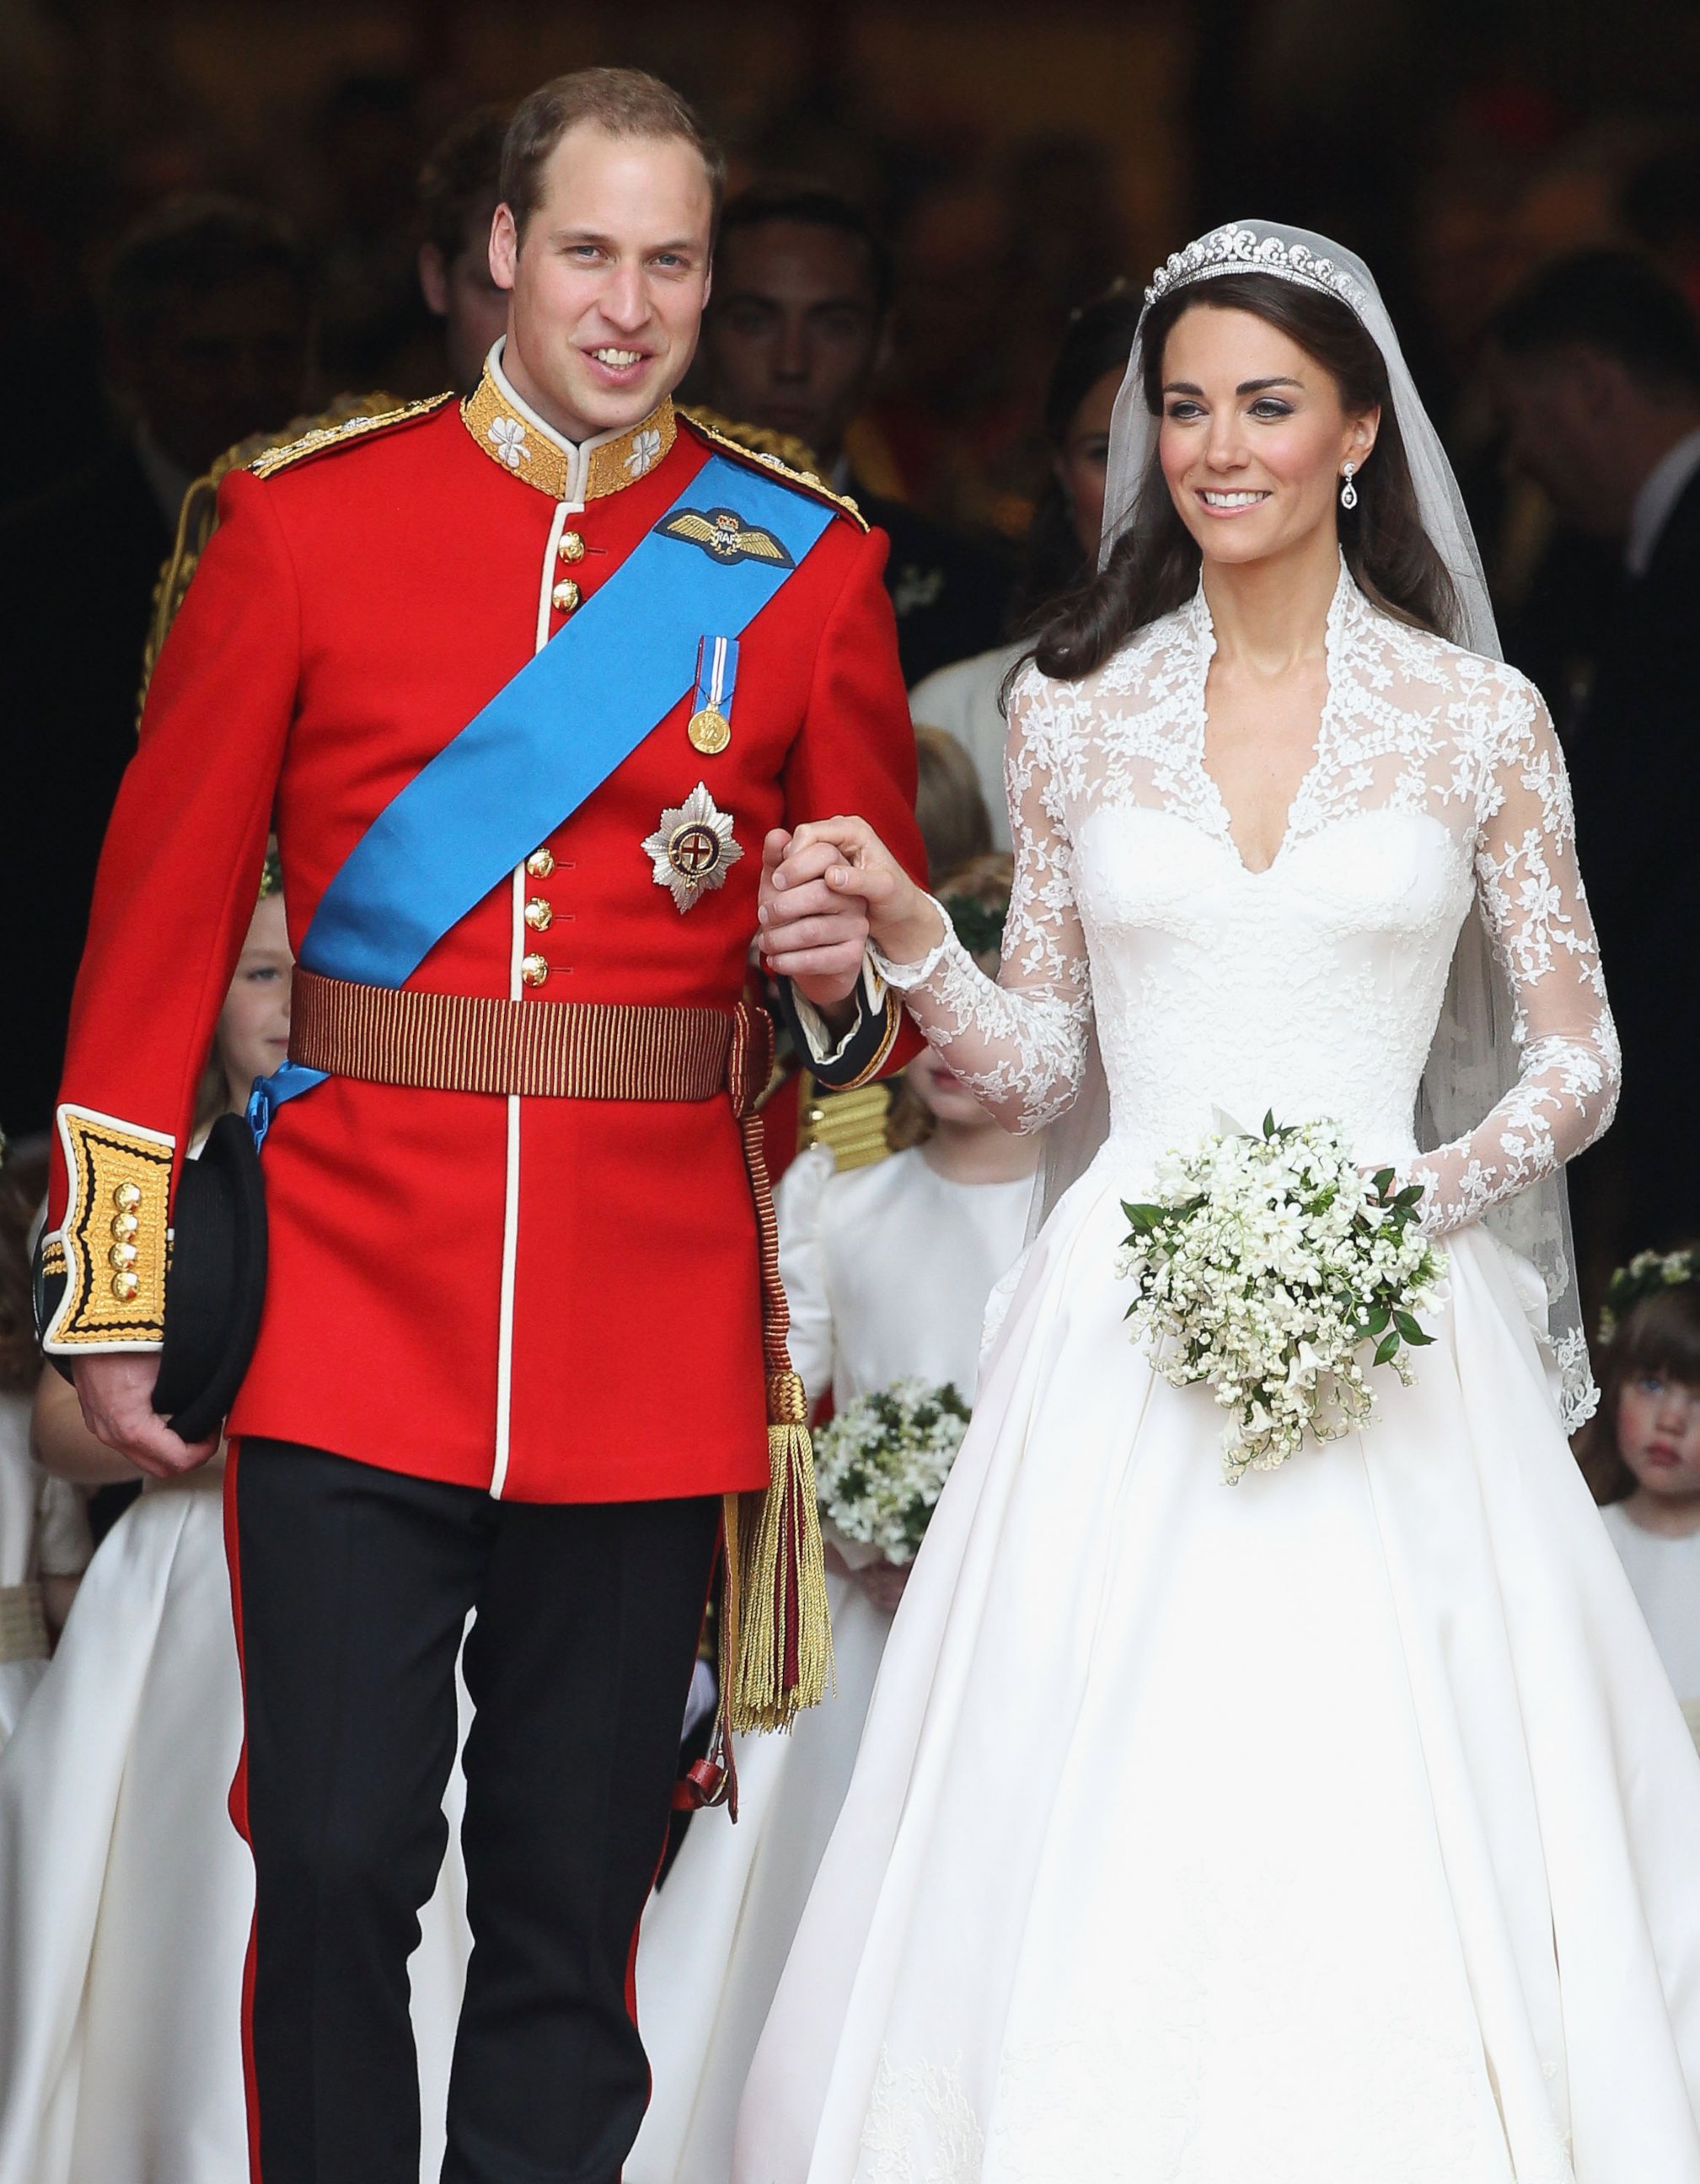 PHOTO: Prince William, Duke of Cambridge and Catherine, Duchess of Cambridge smile following their marriage at Westminster Abbey on April 29, 2011 in London.